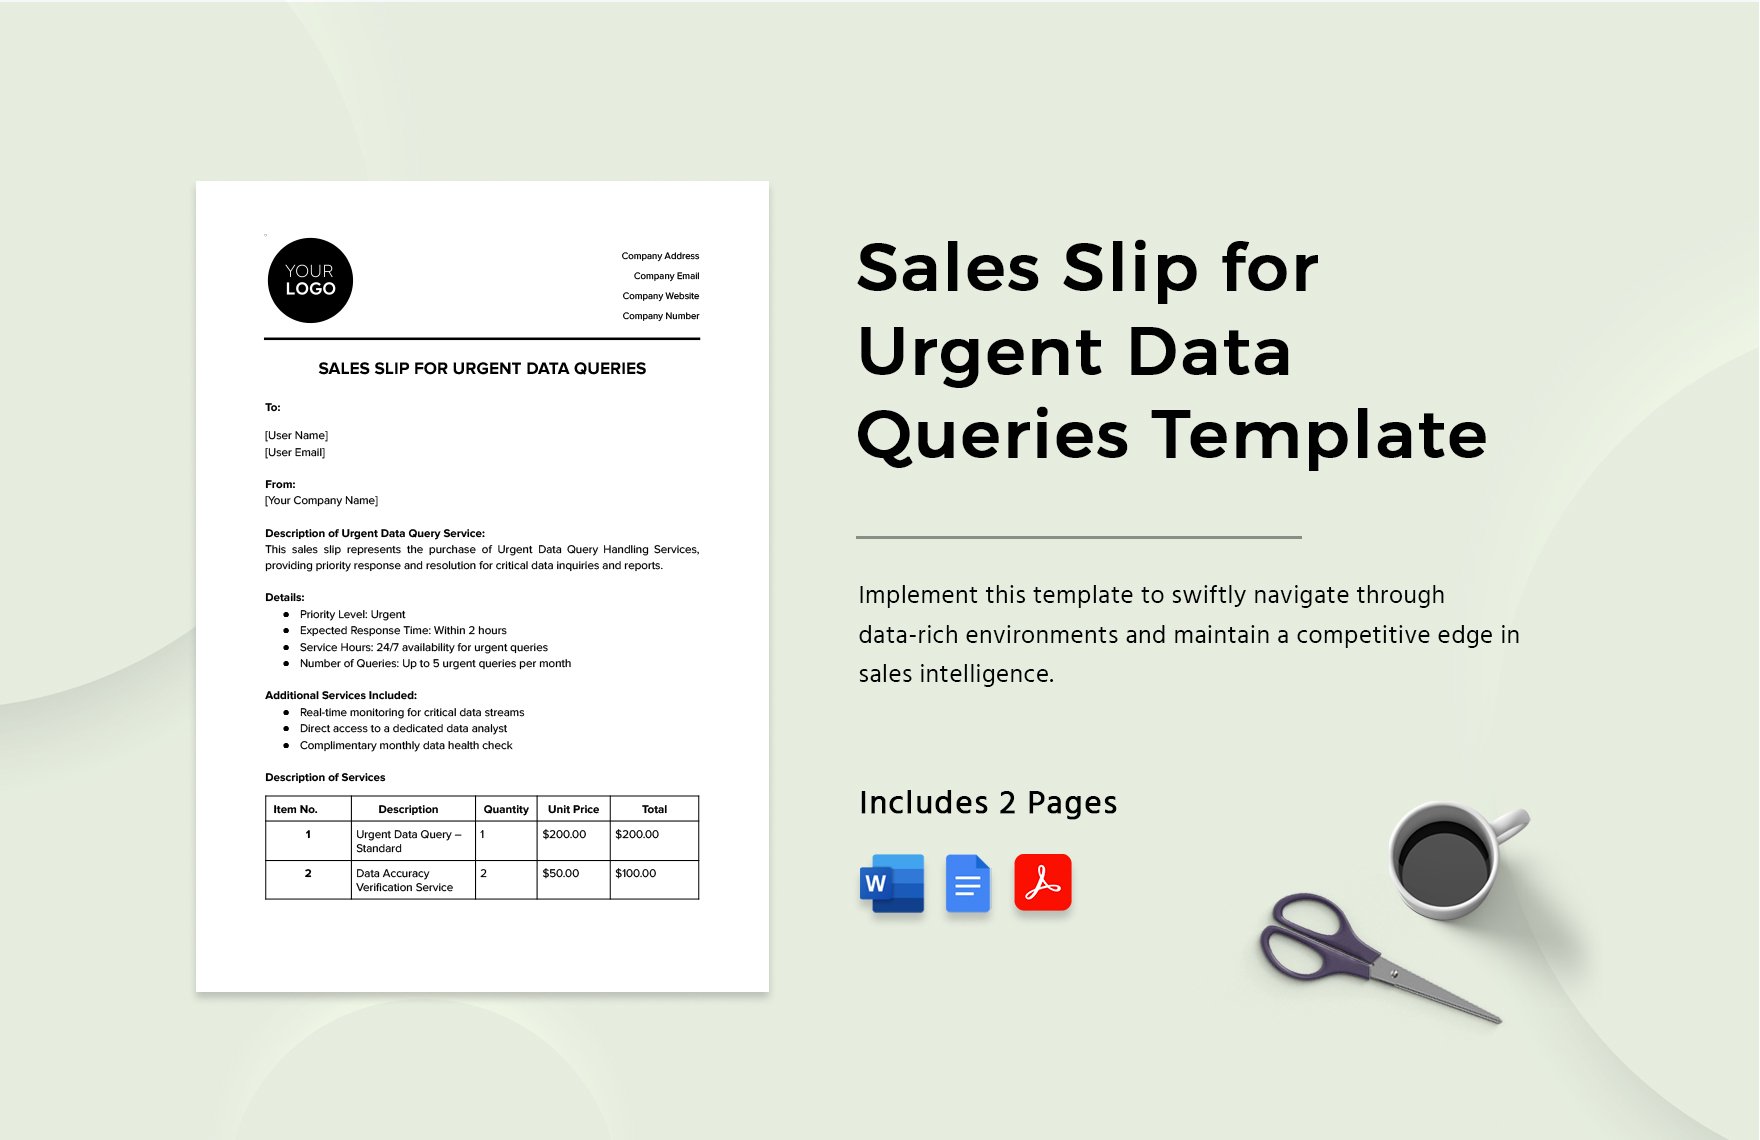 Sales Slip for Urgent Data Queries Template in Word, Google Docs, PDF